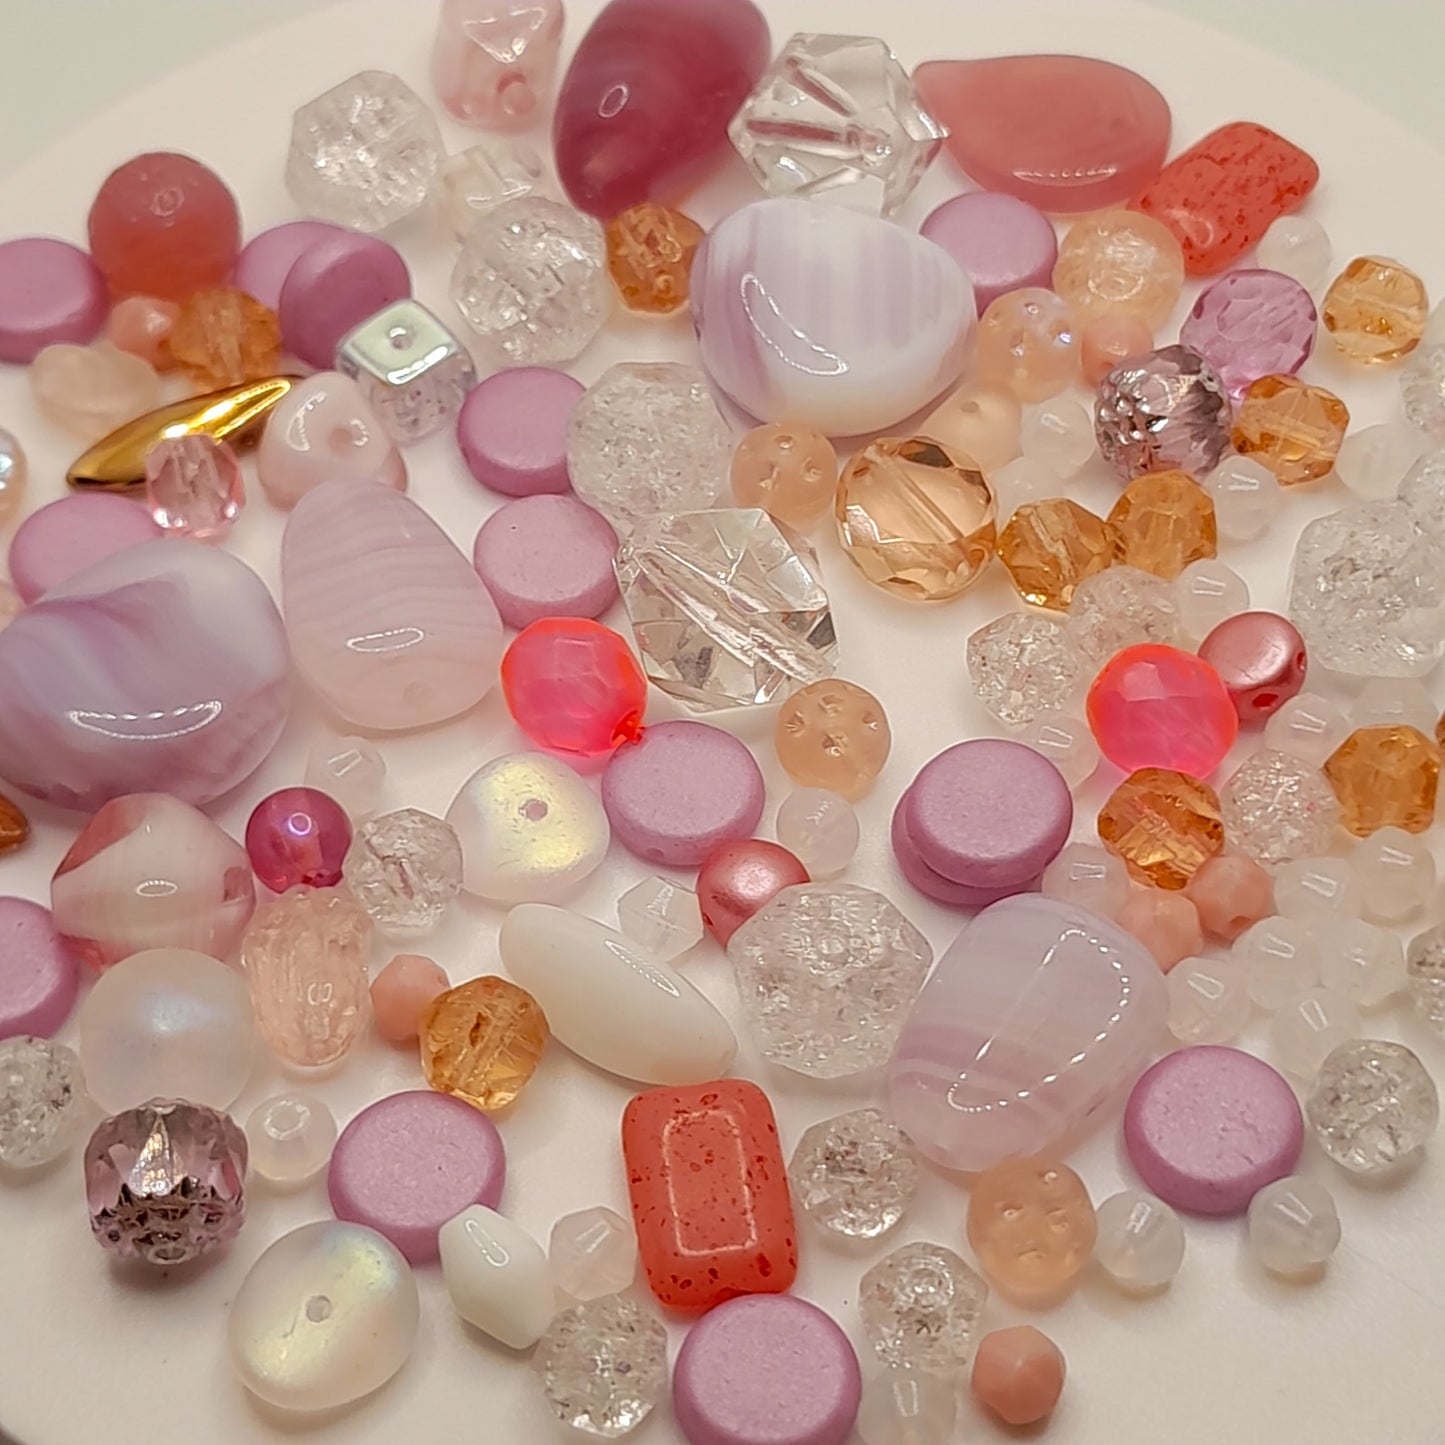 PRECIOSA czech beads "Little princess" for making bracelets, necklaces, earrings and other jewelry. - VadymShop